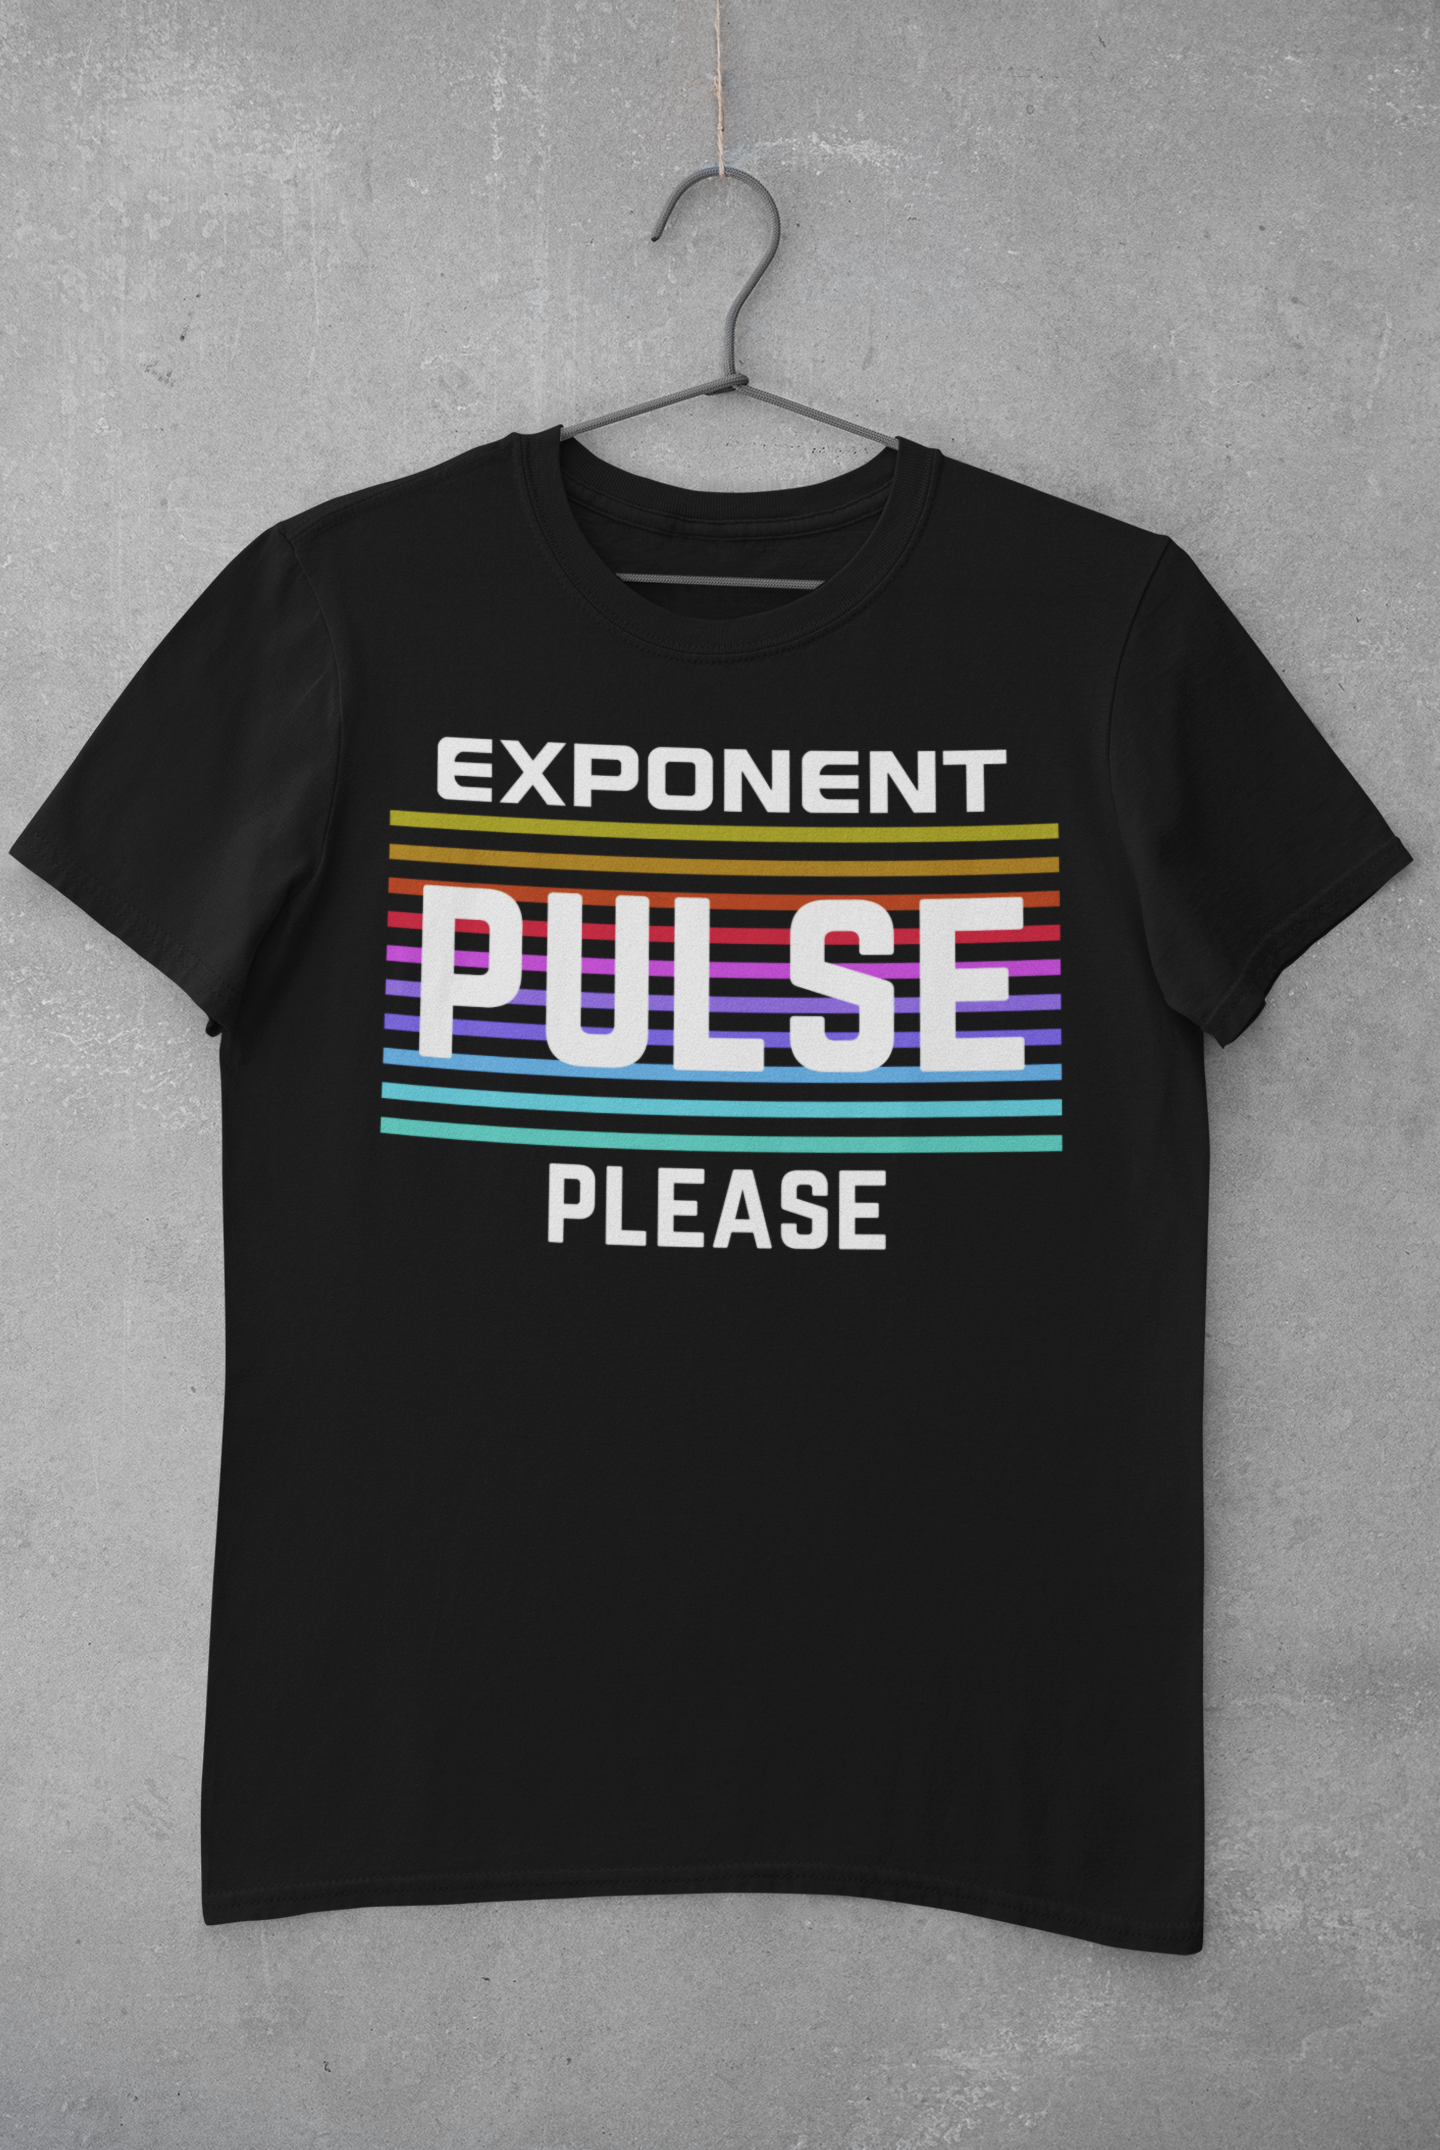 Exponent Pulse Please